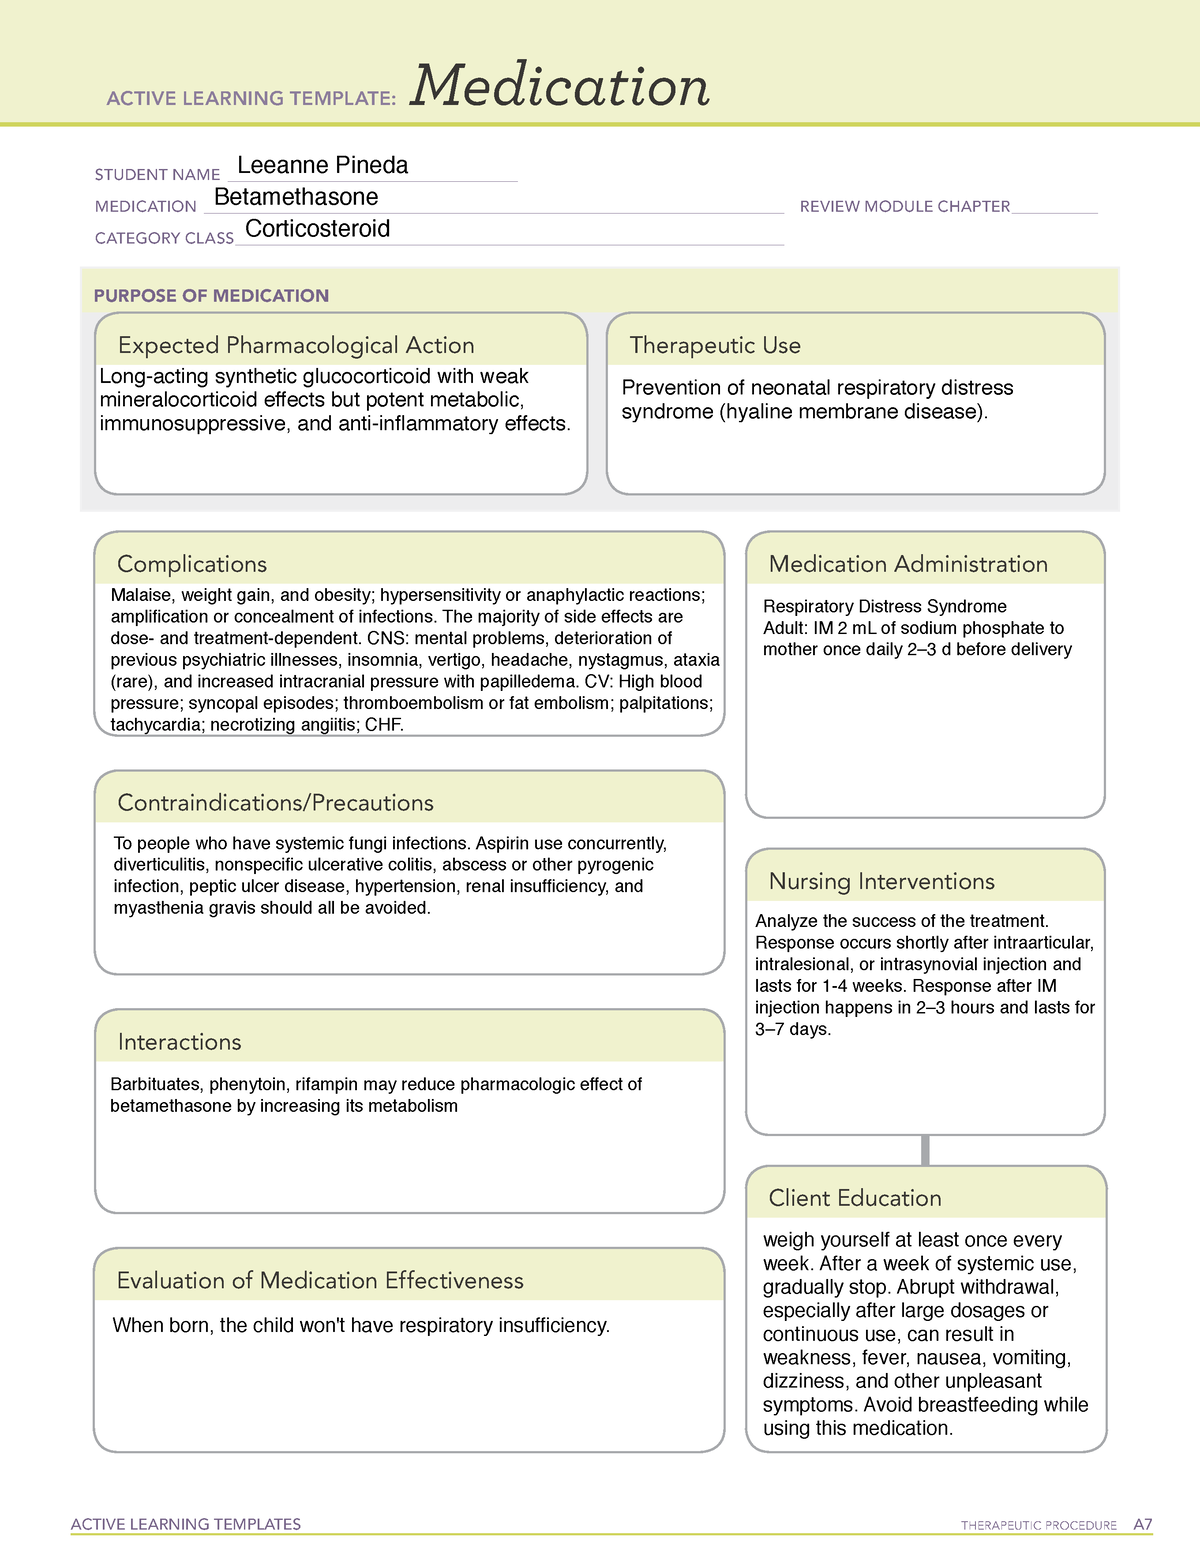 Betamethasone ATI LEARNING TEMPLATE ACTIVE LEARNING TEMPLATES